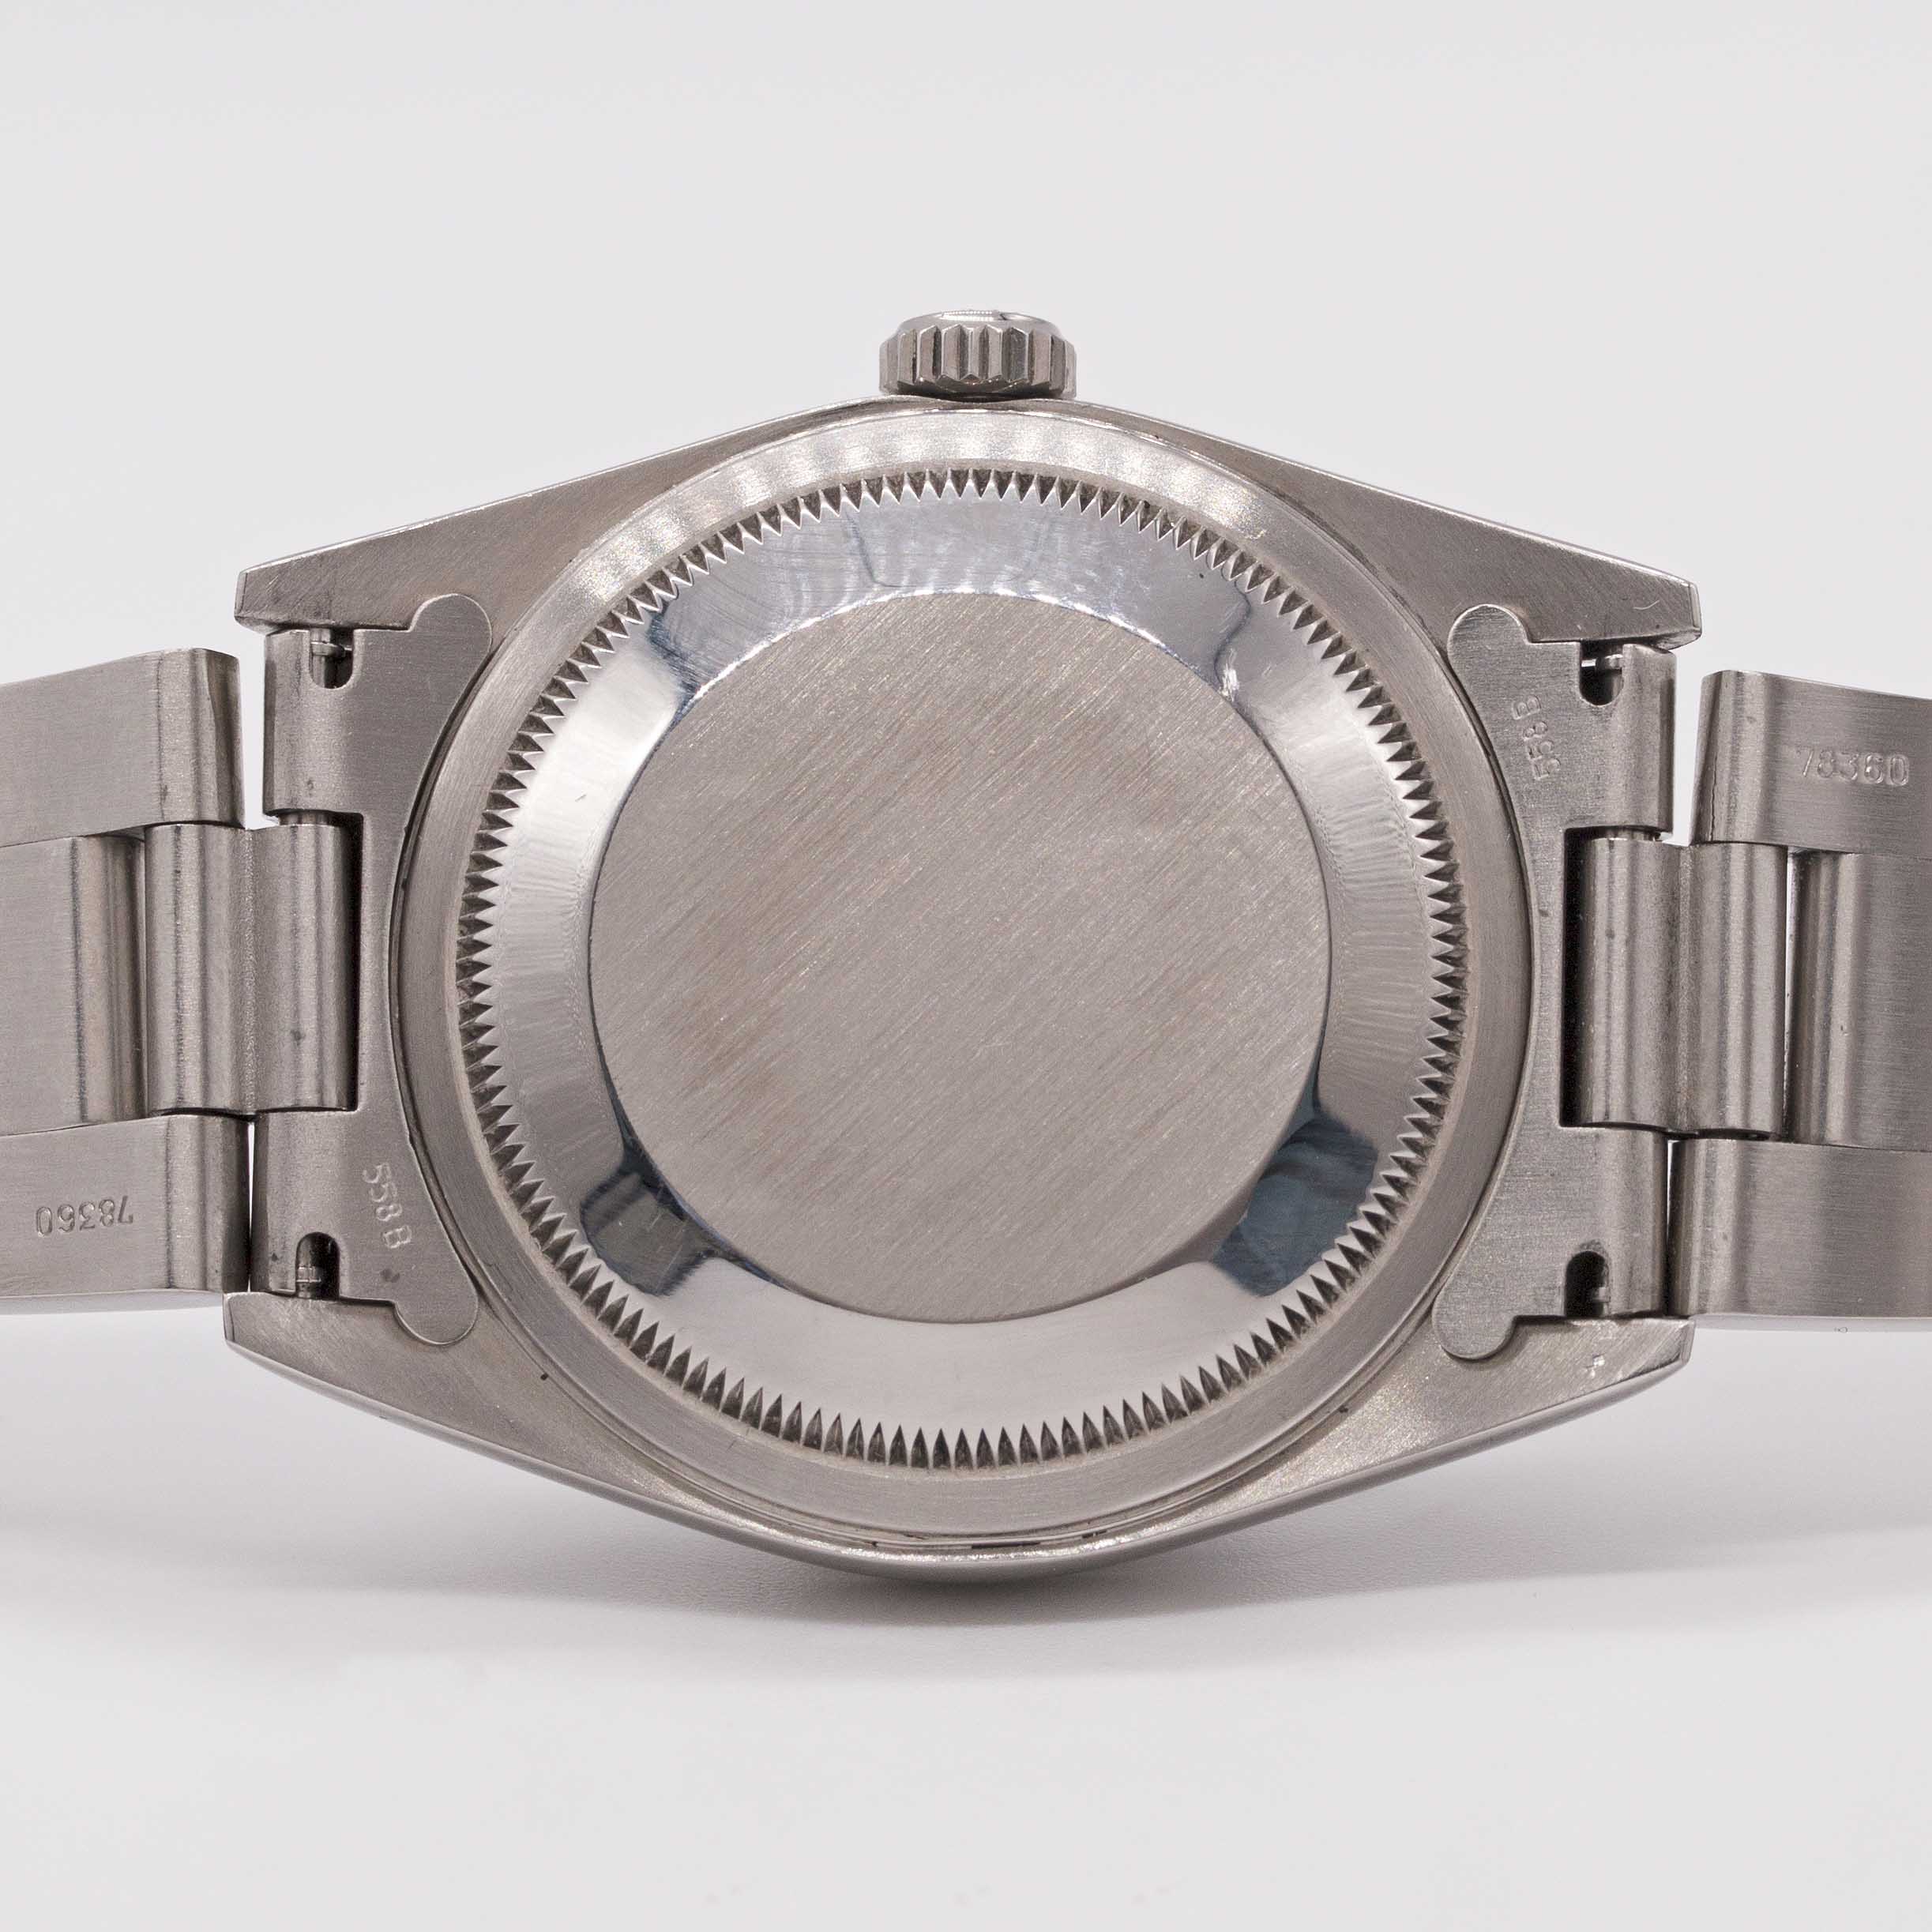 A GENTLEMAN'S STAINLESS STEEL ROLEX OYSTER PERPETUAL DATEJUST BRACELET WATCH CIRCA 2005, REF. - Image 6 of 9